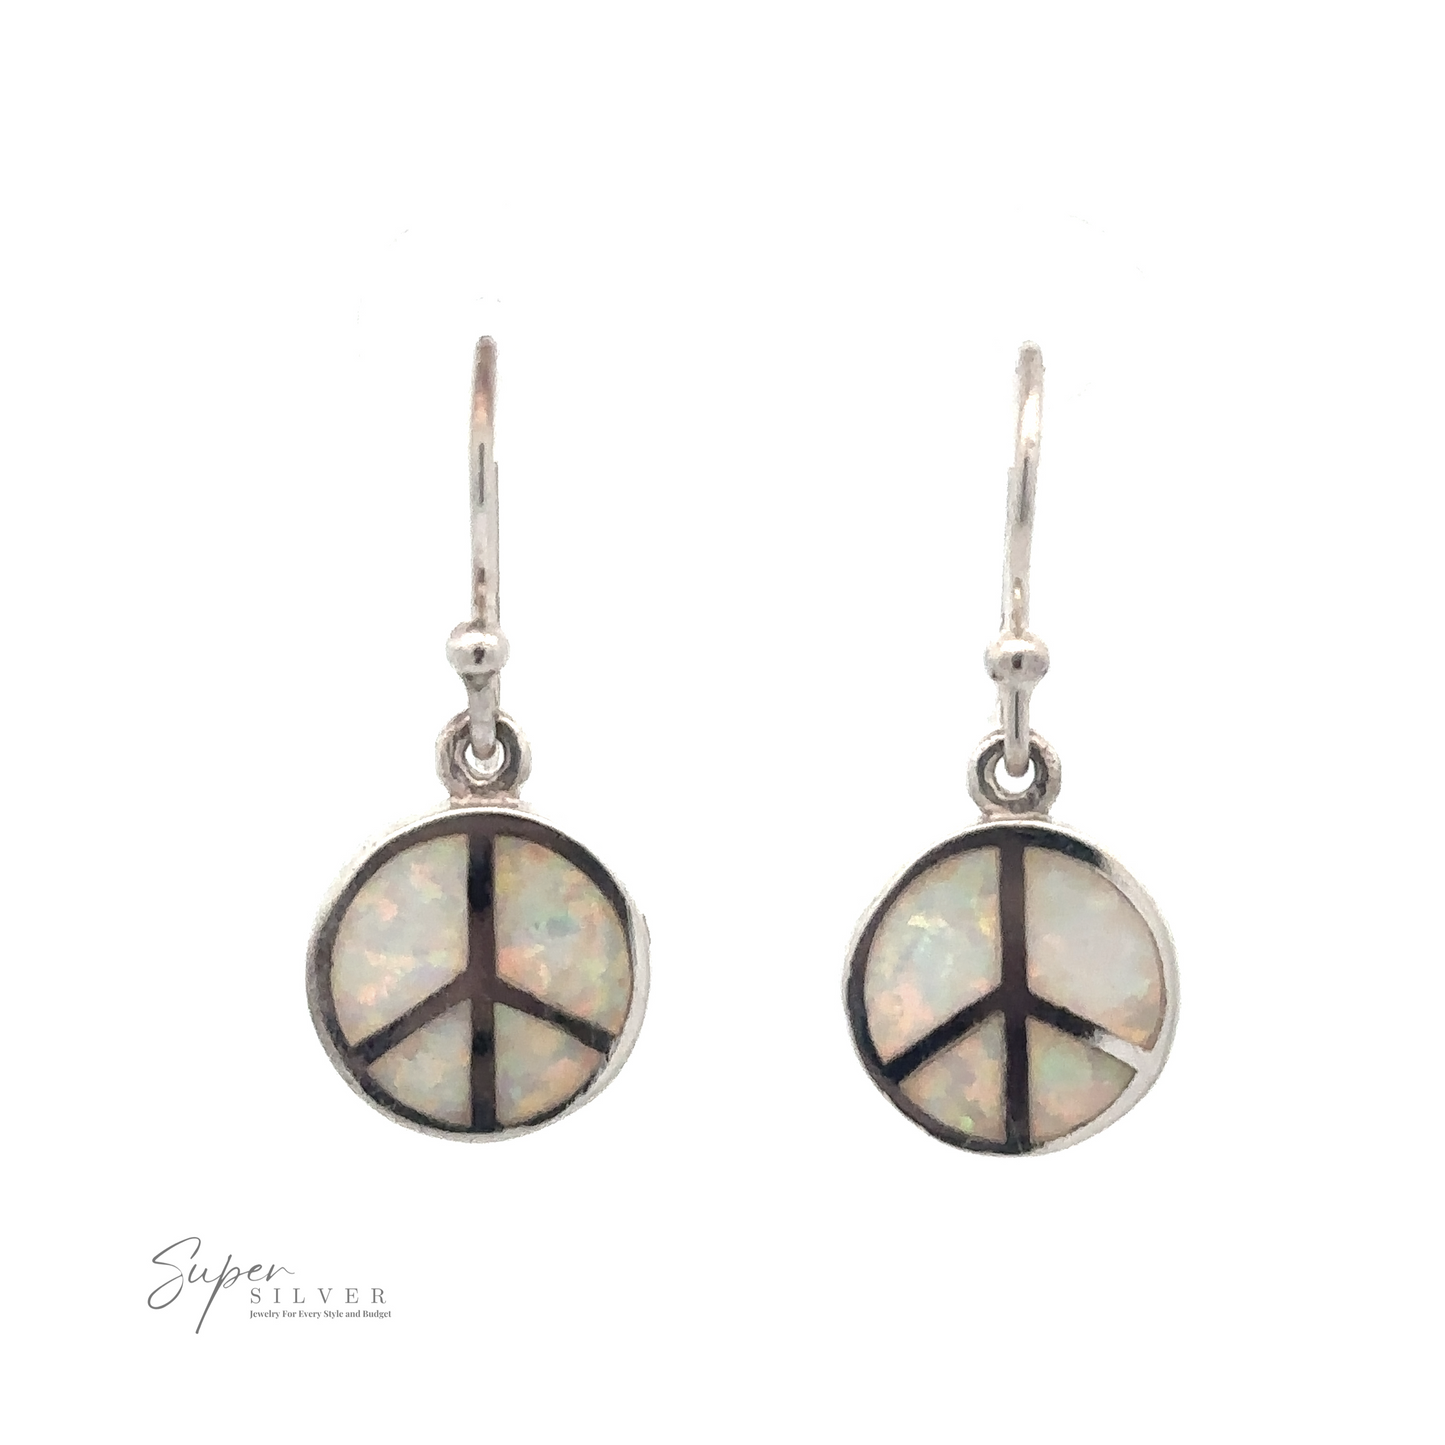 
                  
                    Two sterling silver drop earrings with peace symbol designs on iridescent round surfaces. The logo "Super Silver" is visible in the bottom left corner, adding a touch of sophistication to these exquisite White Created Opal Round Peace Sign Earrings.
                  
                